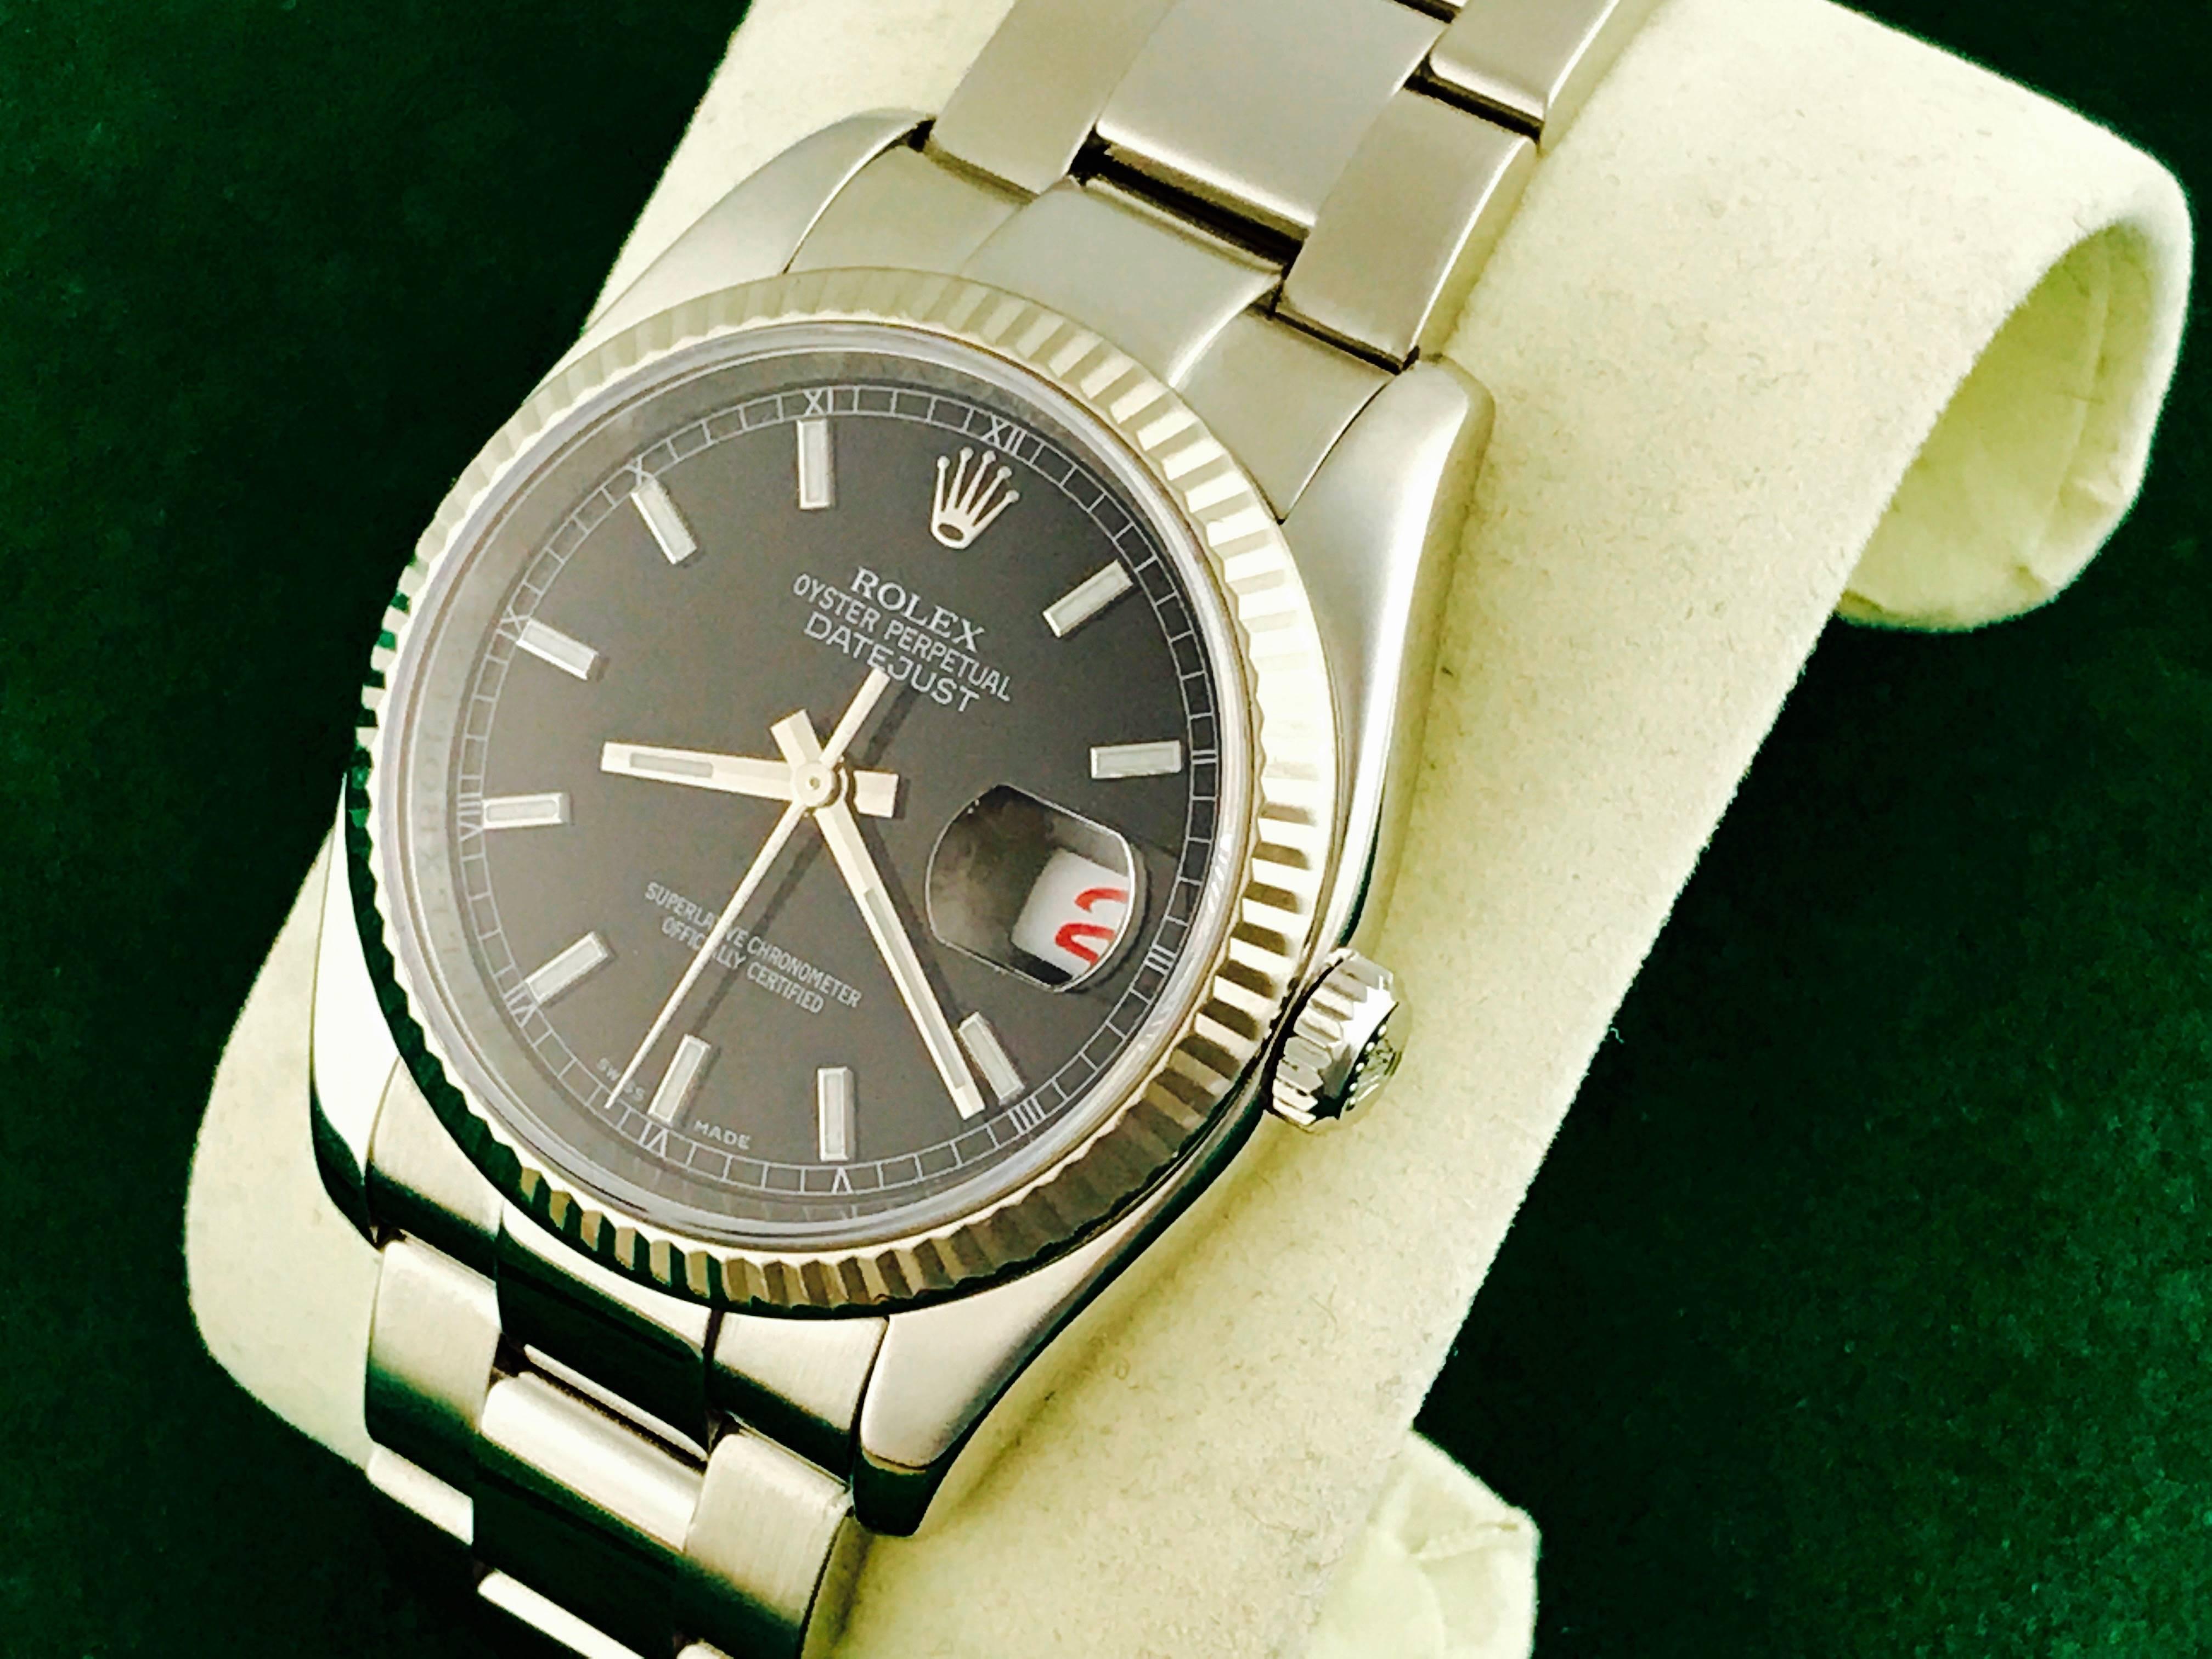 Contemporary Rolex Stainless Steel Datejust Automatic Wristwatch Ref 116234